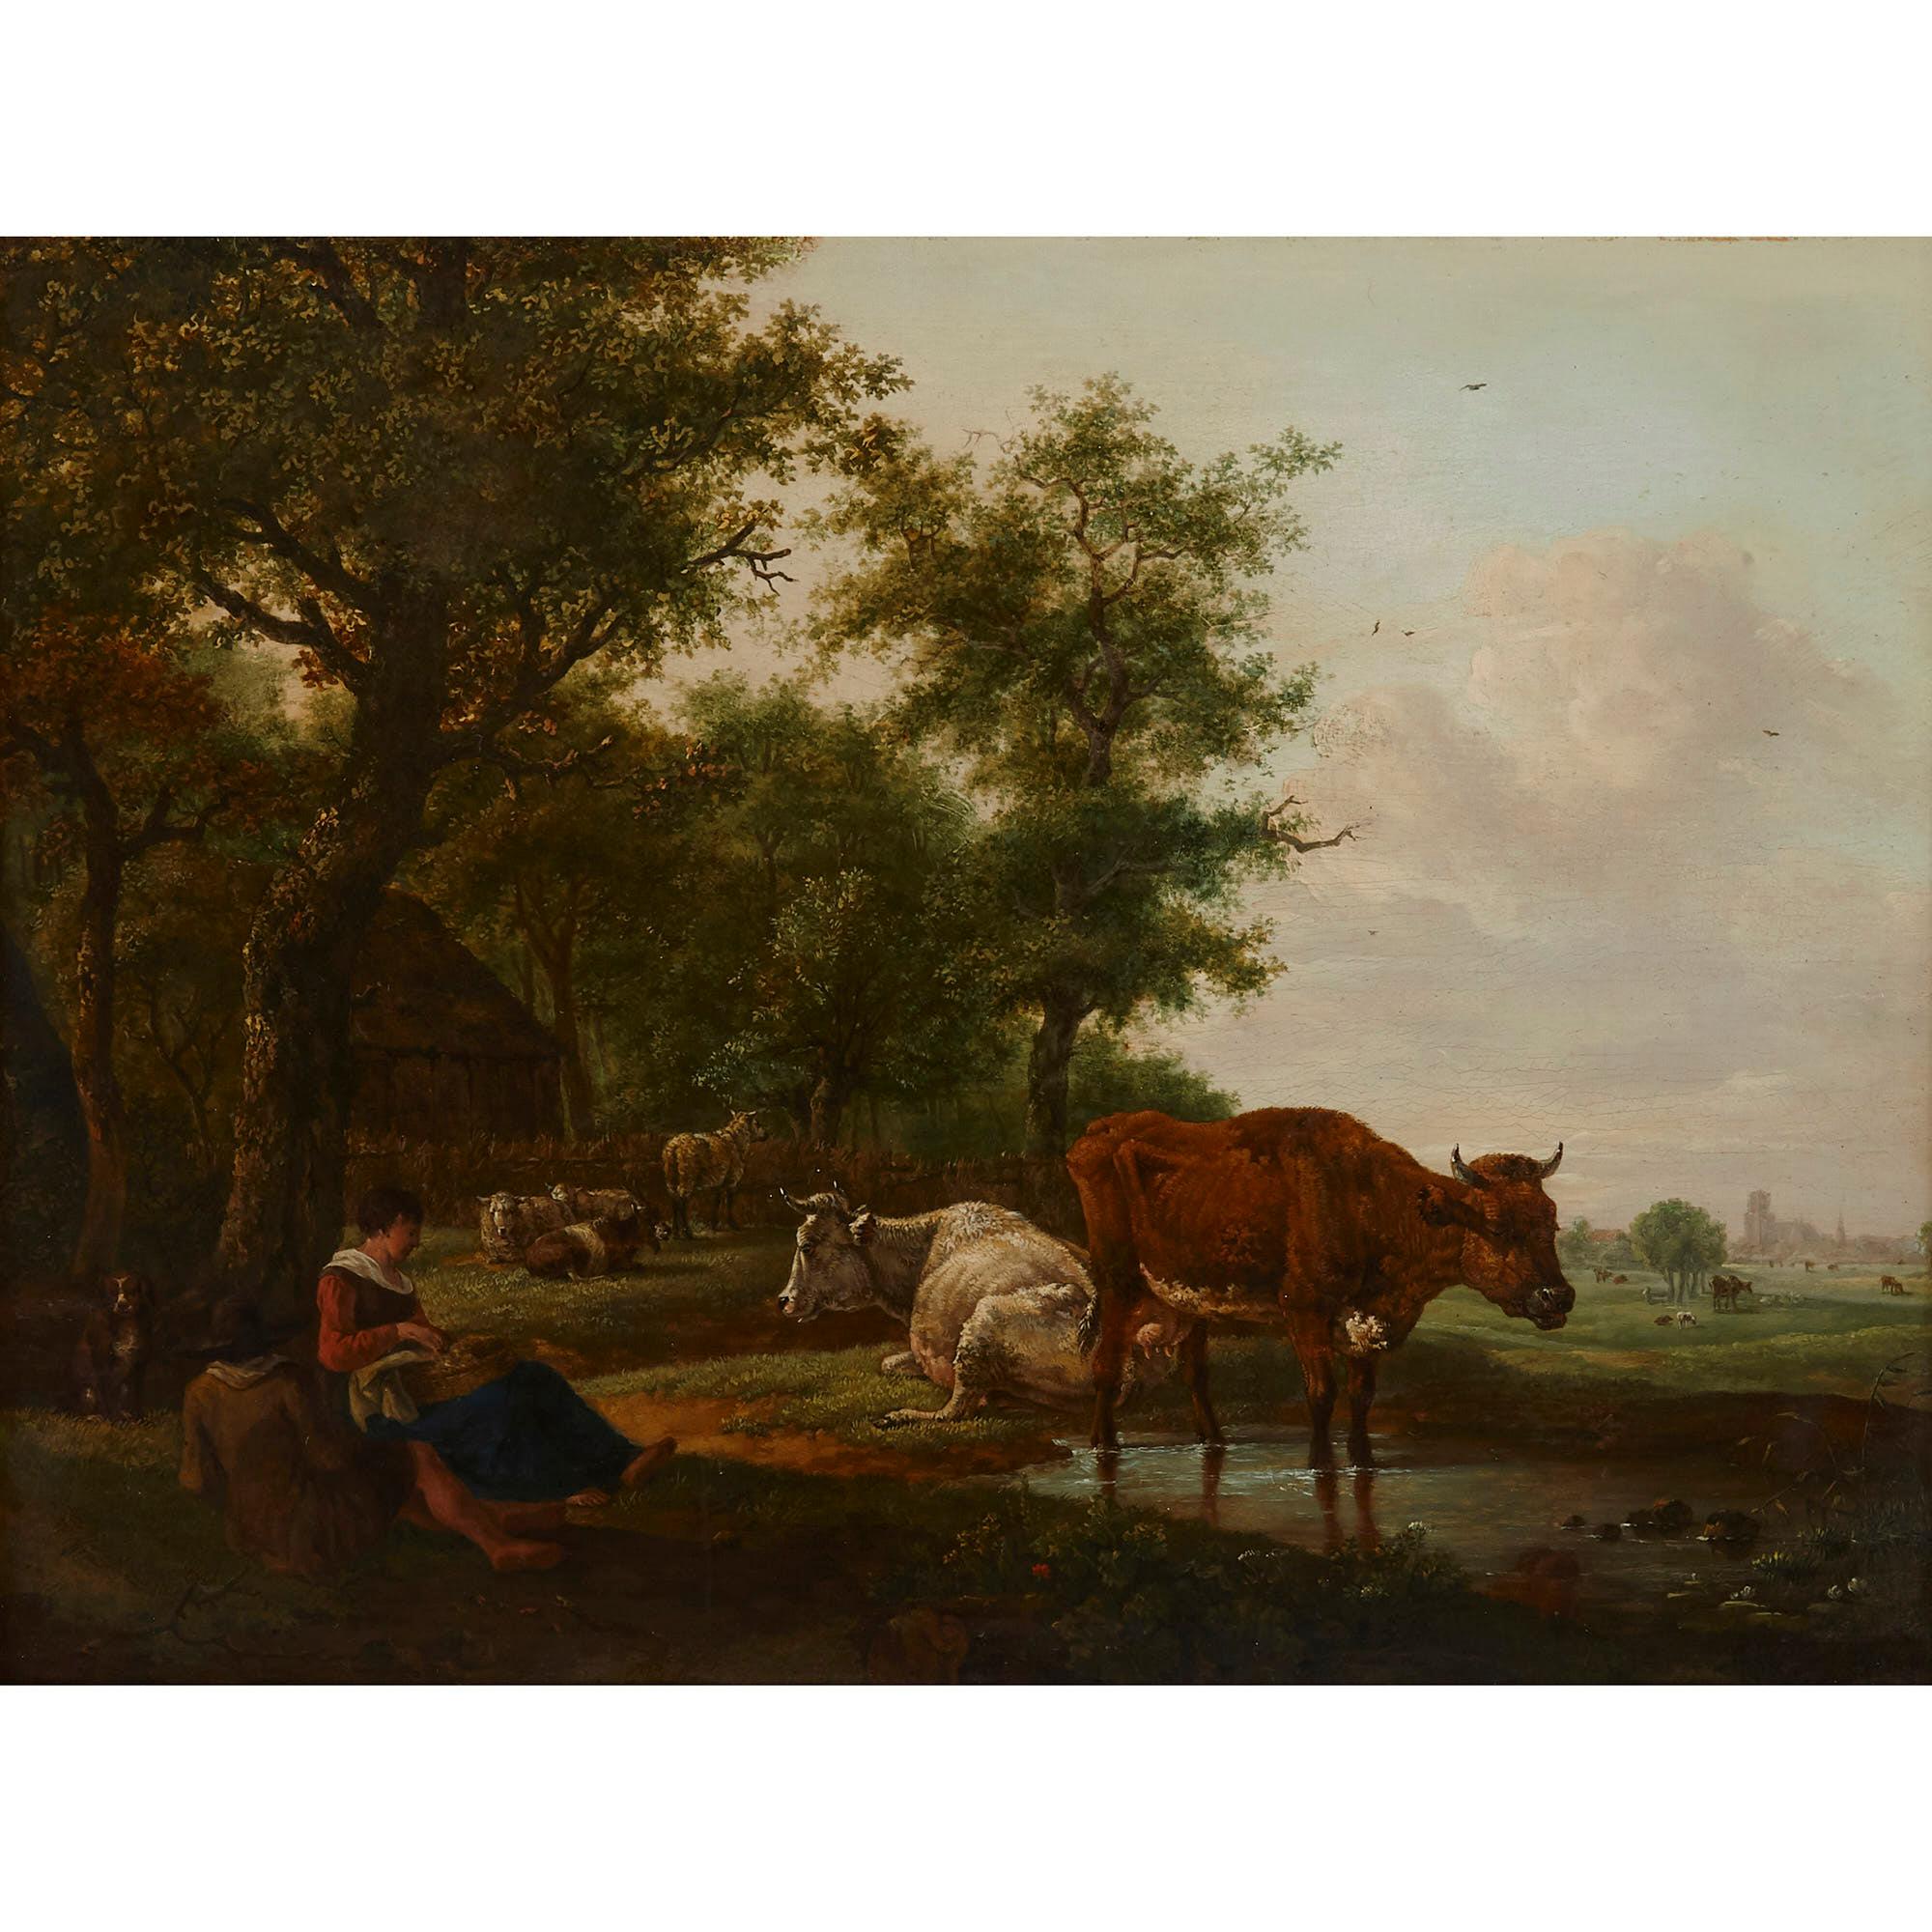 Antique Dutch painting of countryside with figures and animals - Painting by Unknown